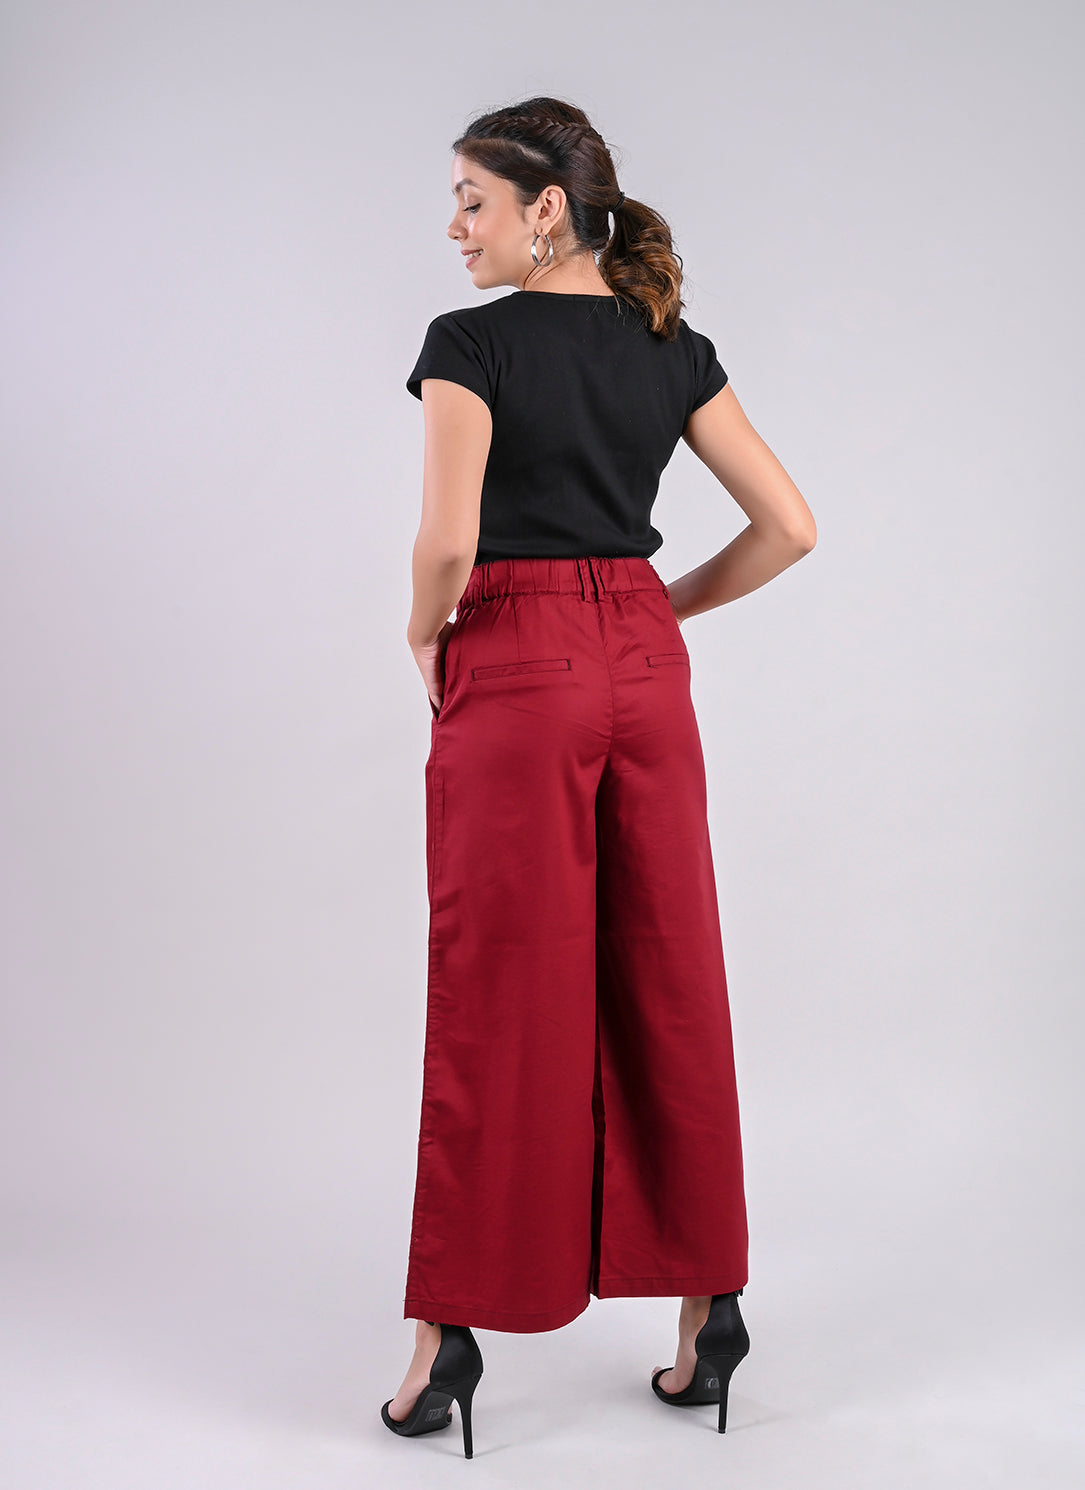 PLEATED PALAZZO PANTS IN ROSEWOOD